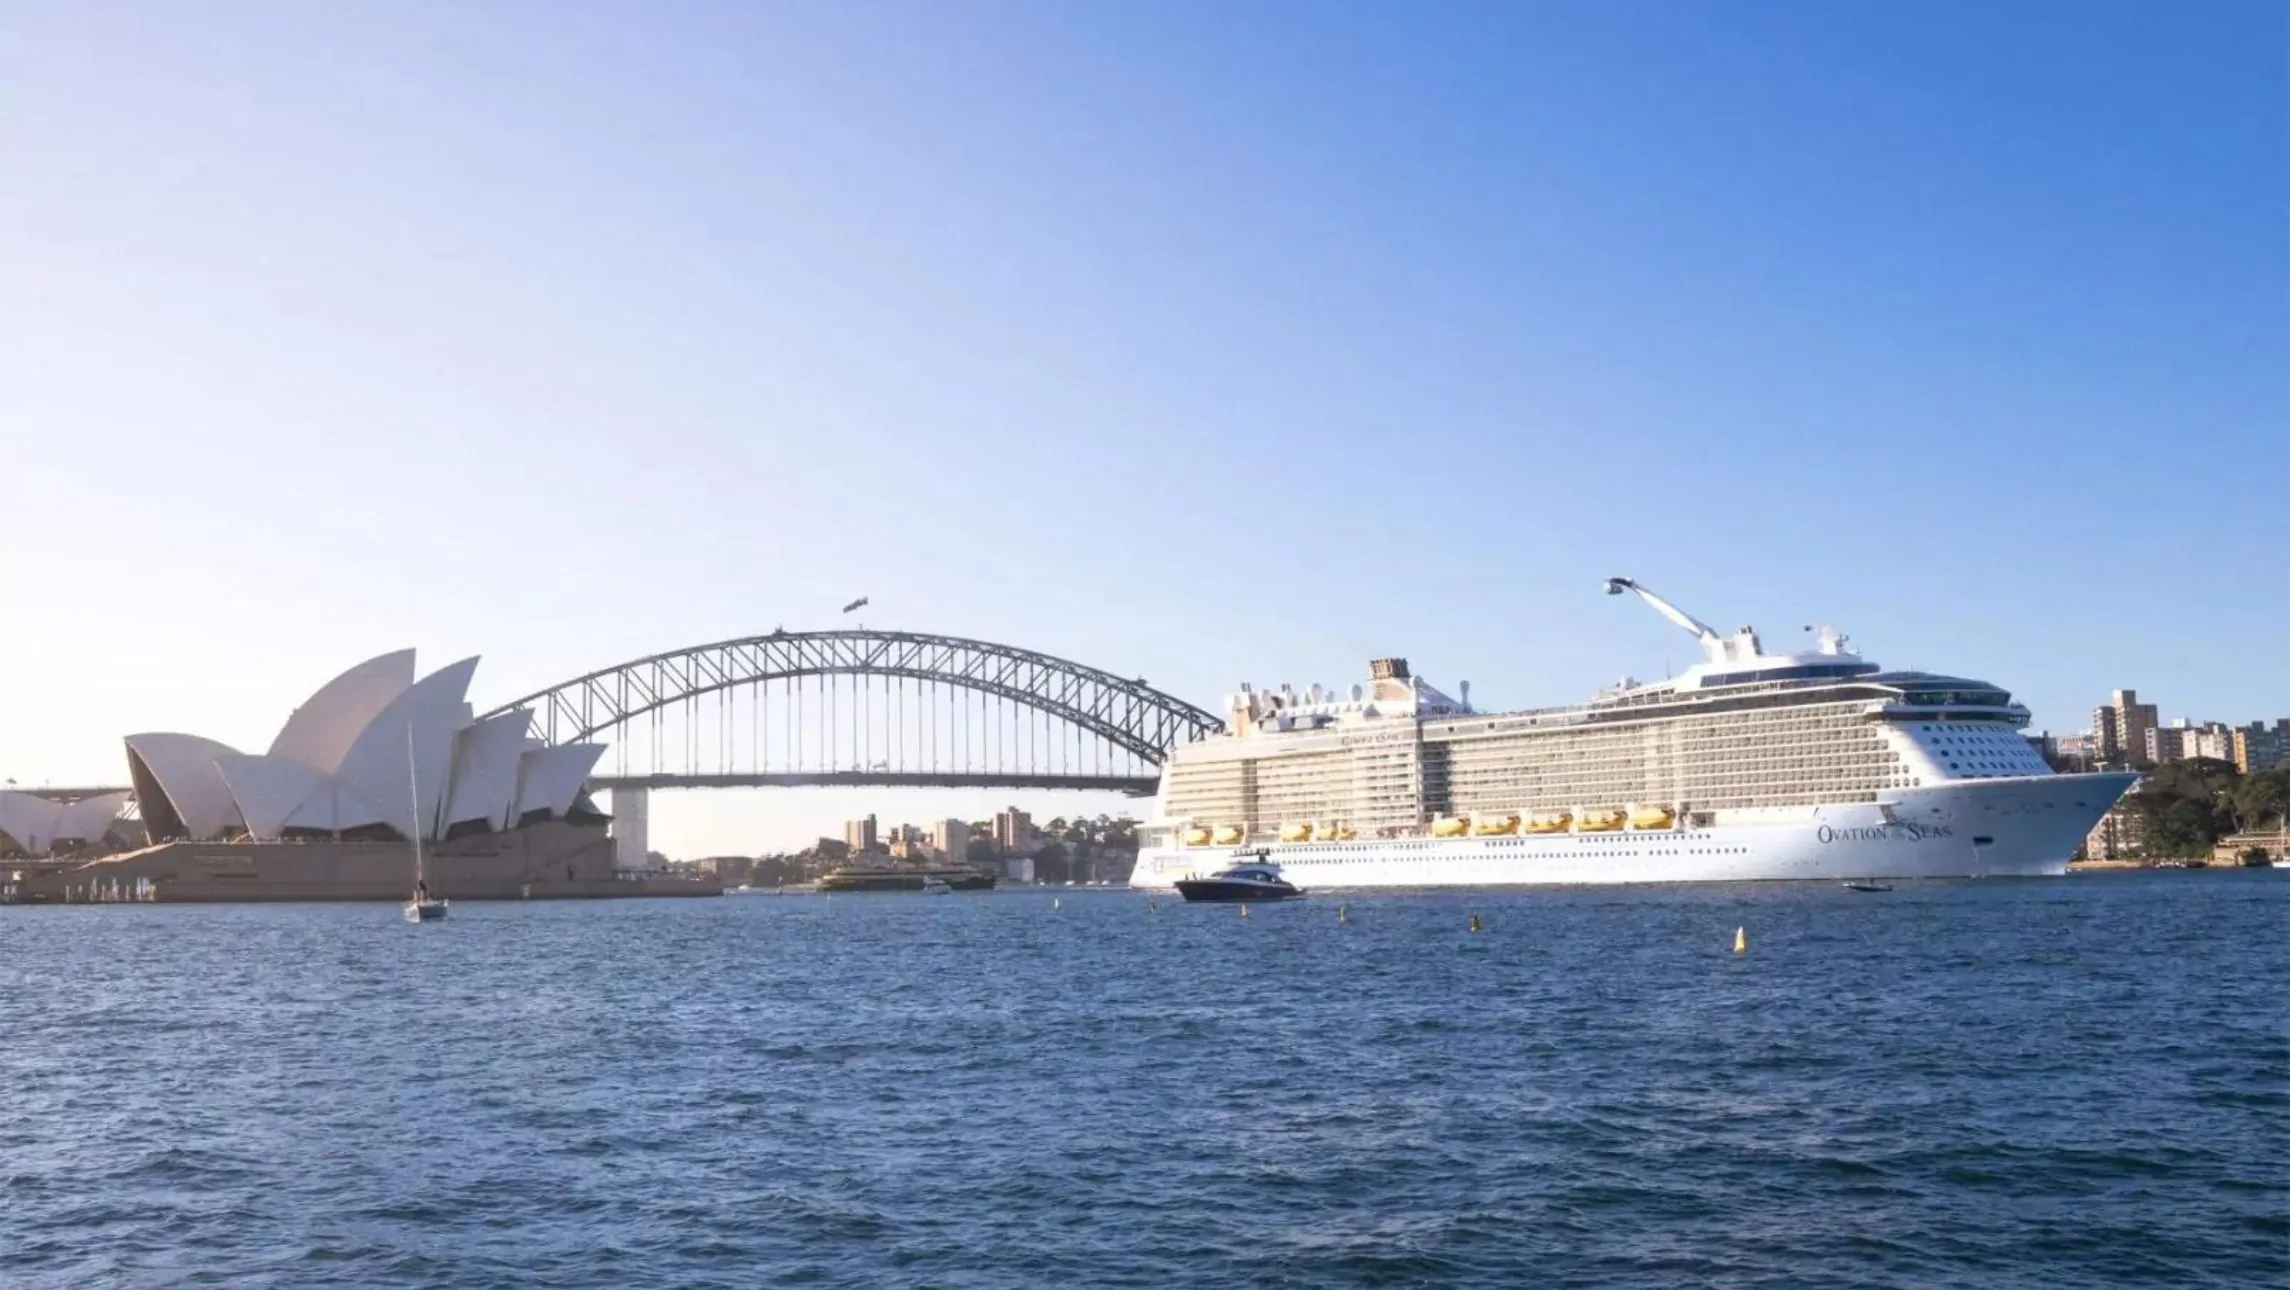 The Discovery Class of ships could fit under the Sydney Harbour Bridge